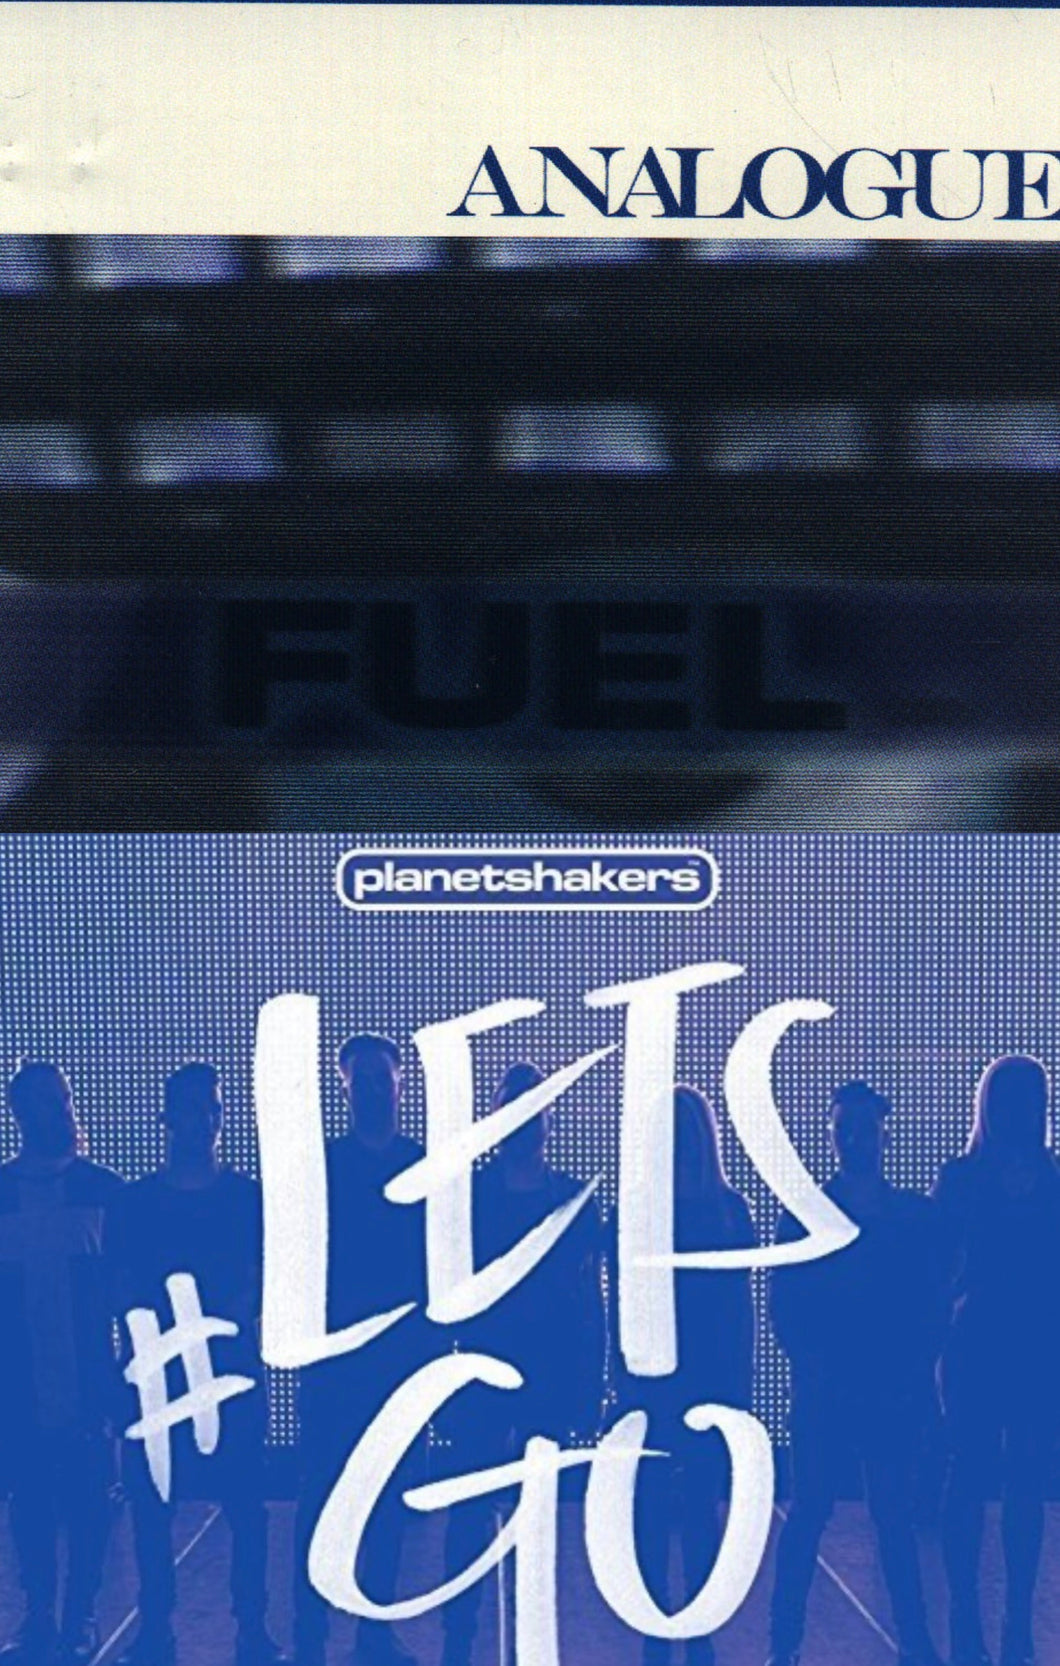 Analogue Worship Fuel + Planetshakers #Let's Go 2CD/DVD